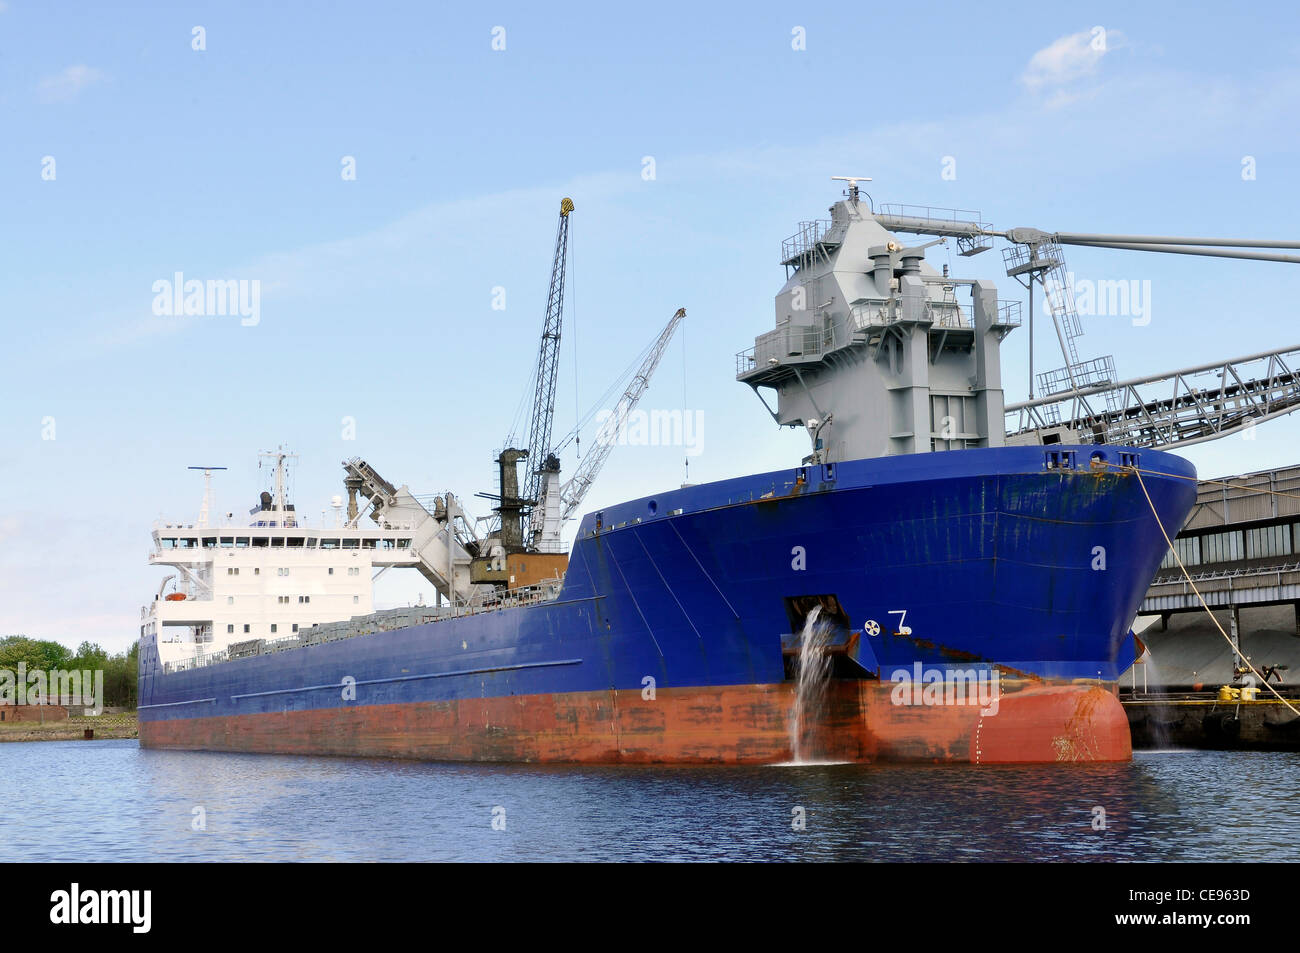 Industry and commerce: cargo ship anchored in a harbor Stock Photo